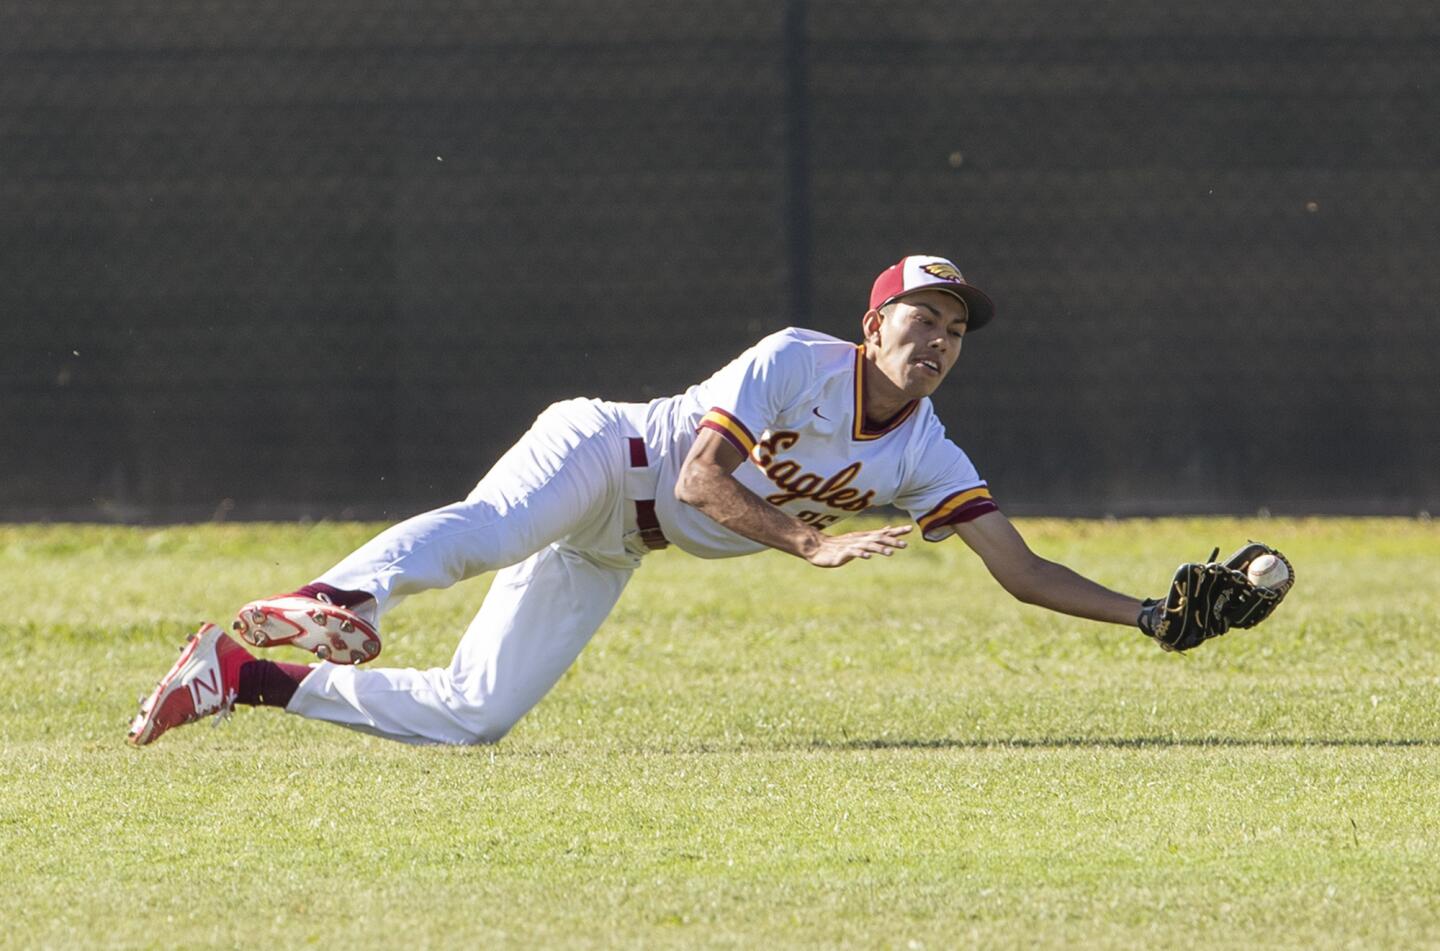 Estancia's Josh Caldales makes a diving catch on a ball hit by Costa Mesa's Miguel Rodriguez during an Orange Coast League game on Wednesday.